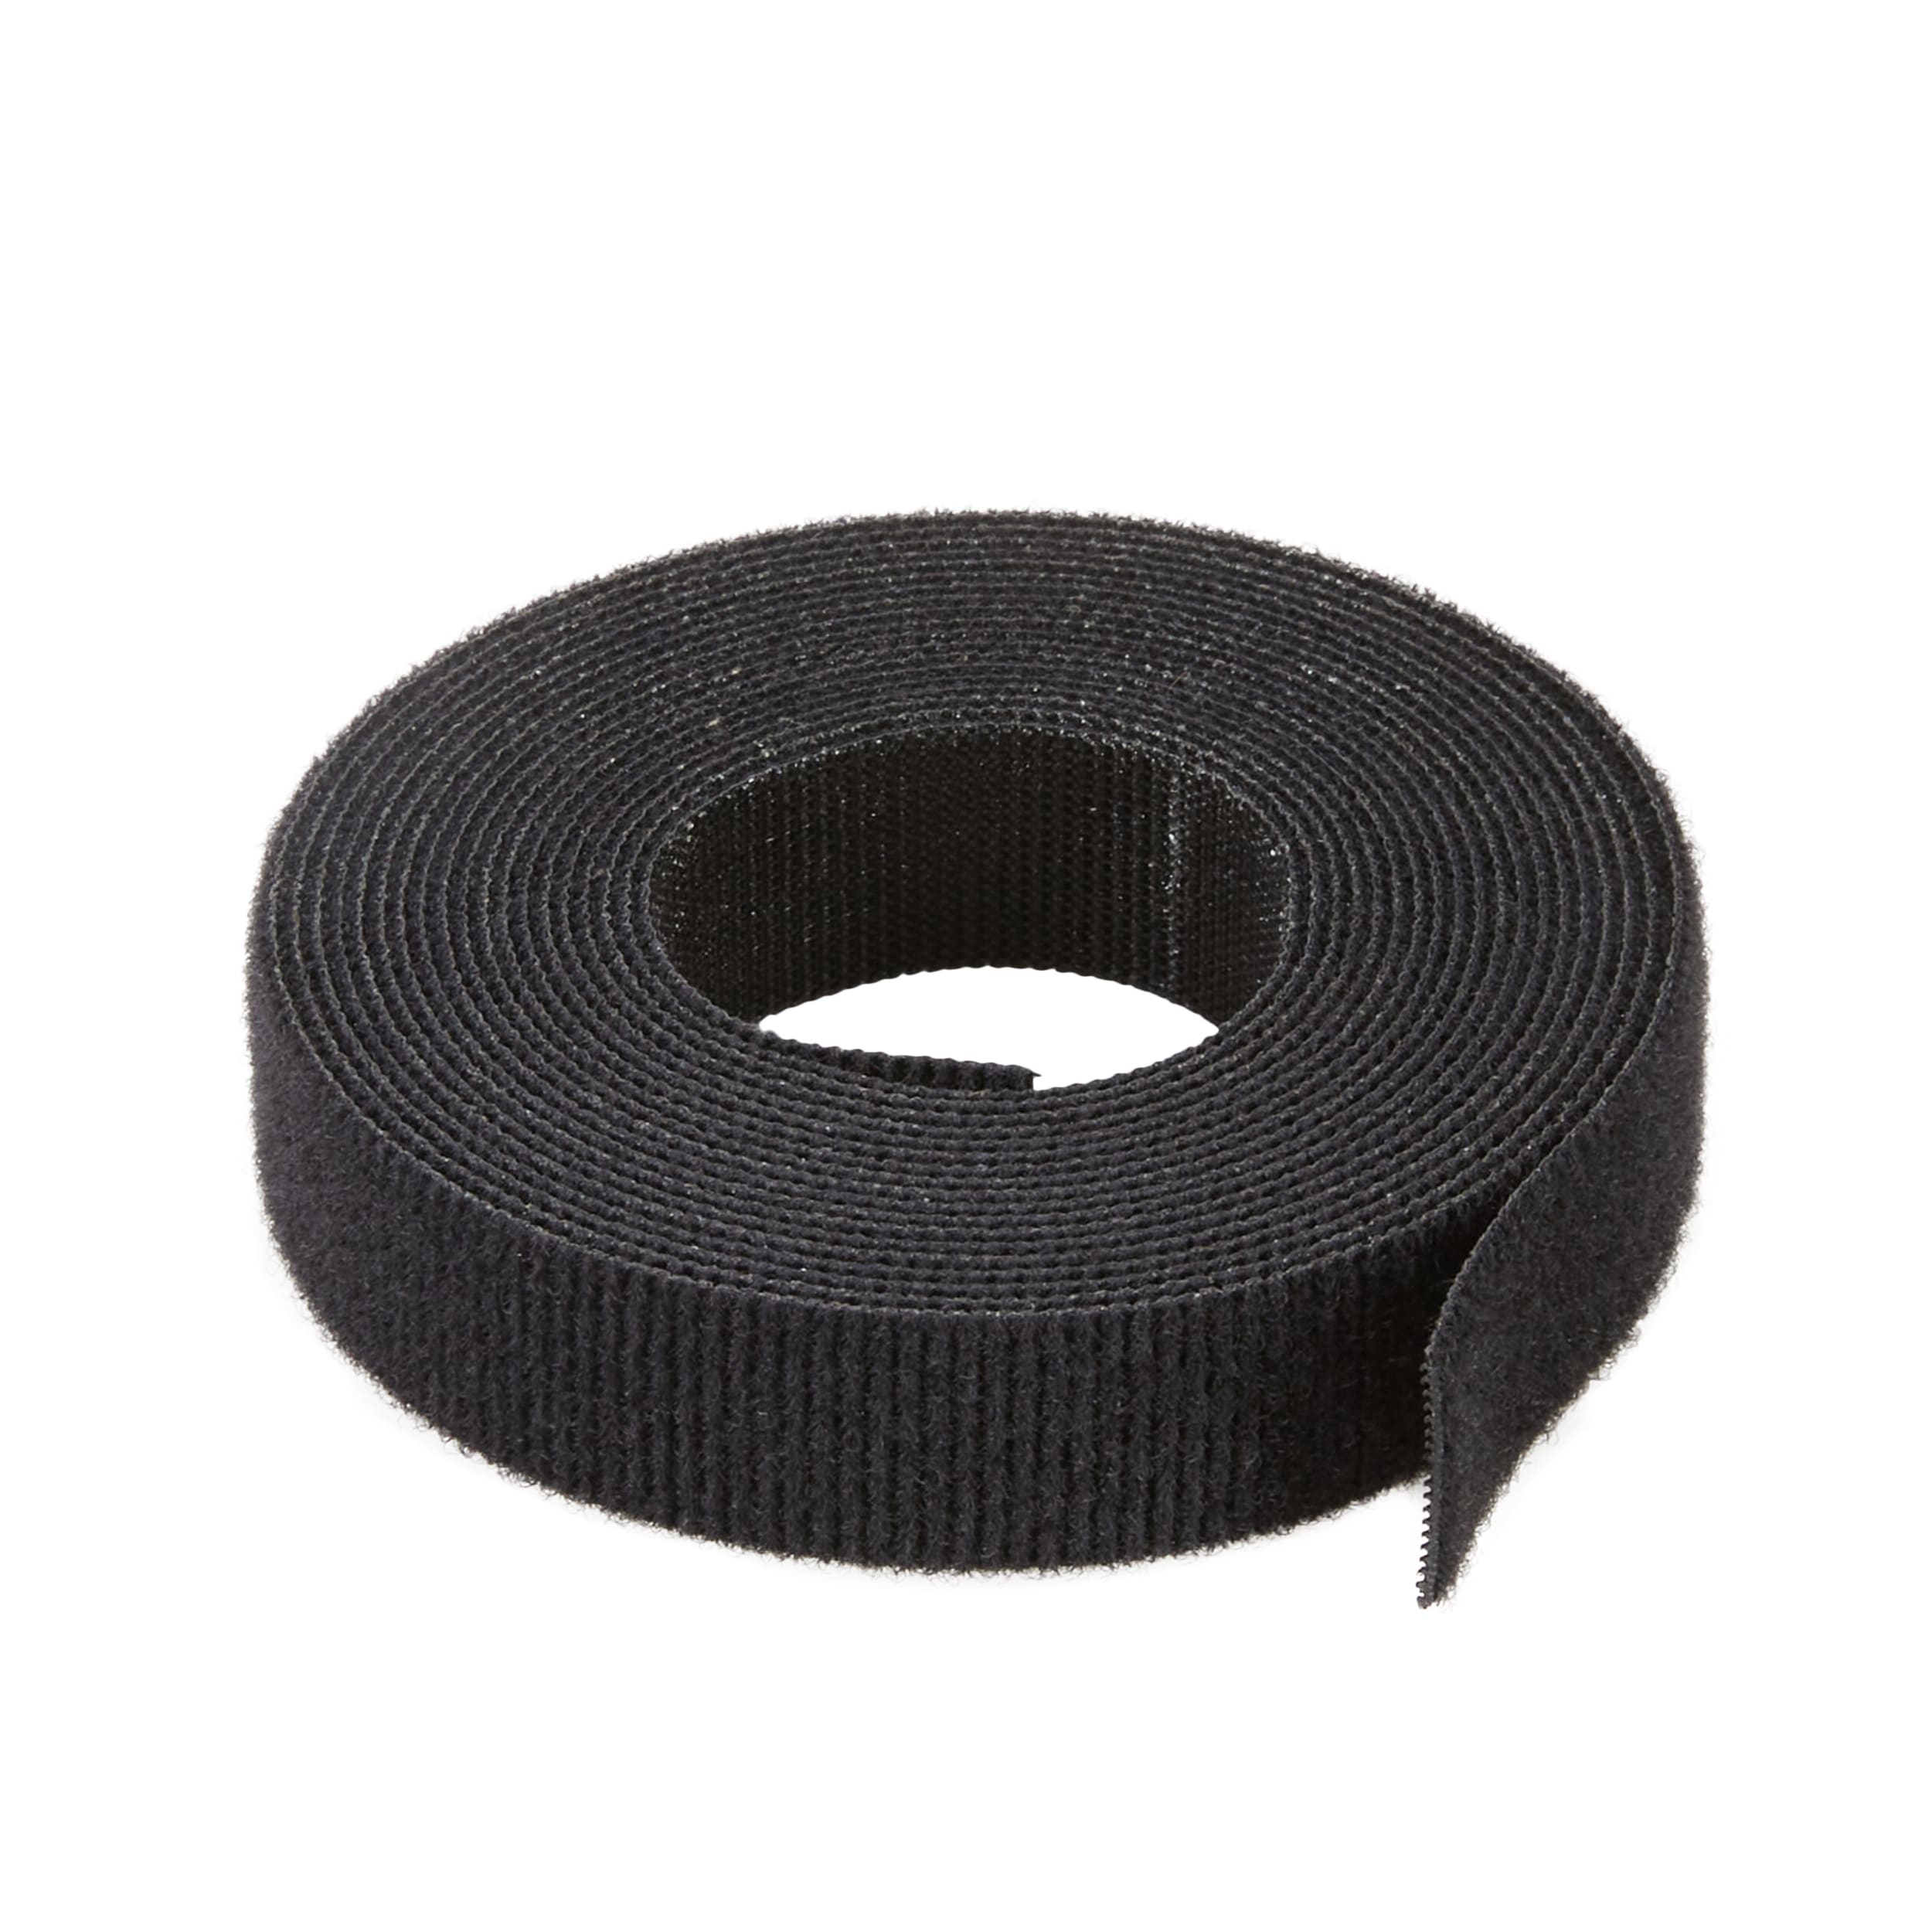 VELCRO® Brand ONE-WRAP® General Purpose Wire/Cable Wrap 